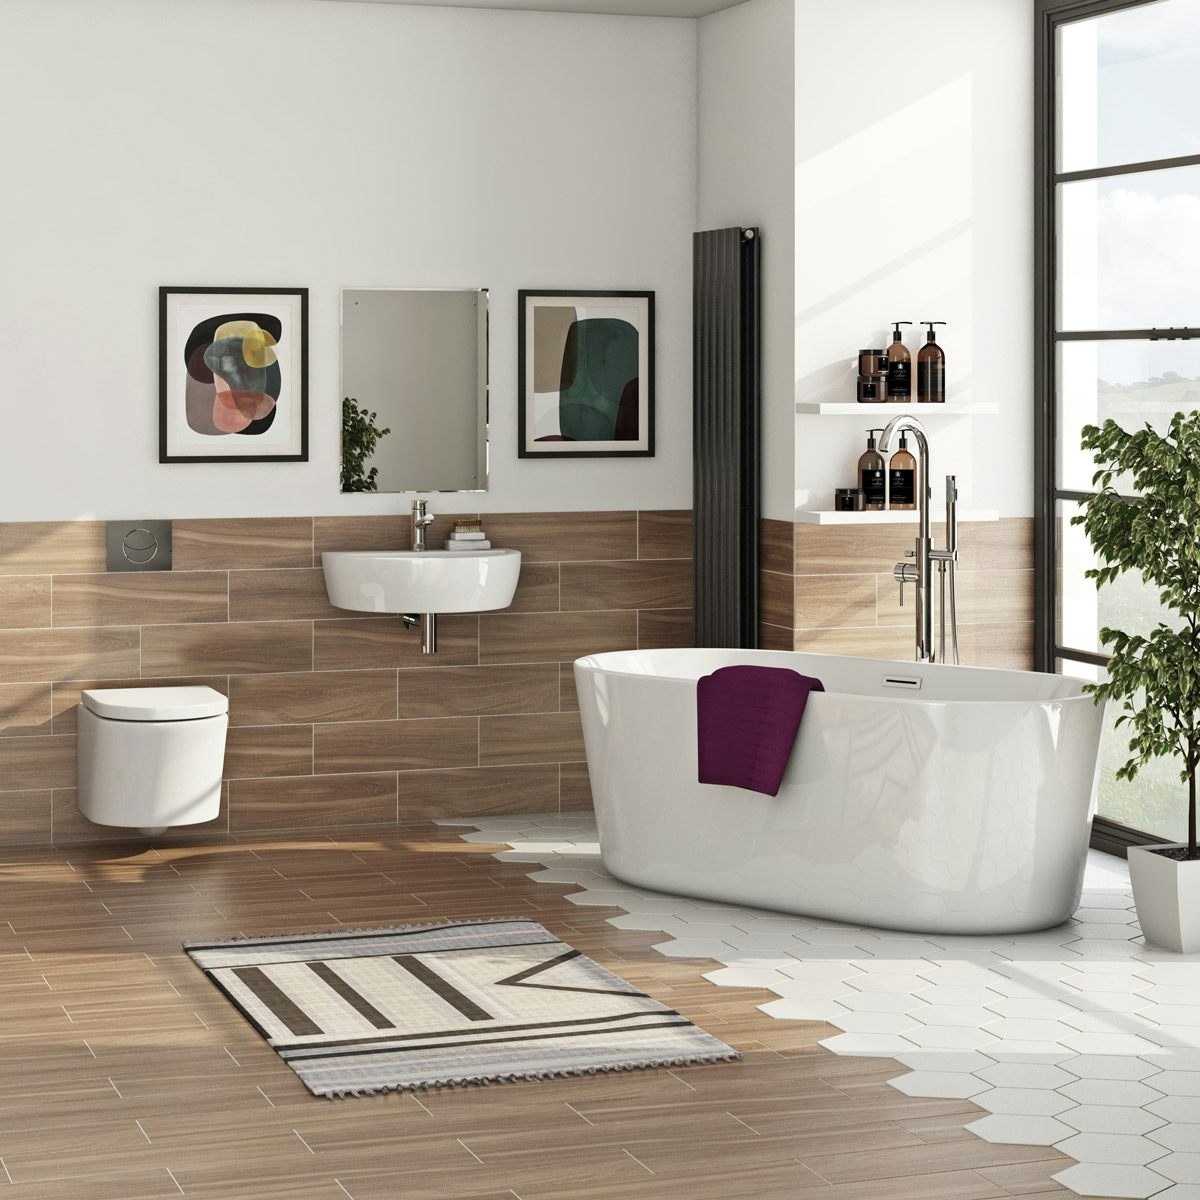 Mode Tate complete bathroom suite with freestanding bath and taps